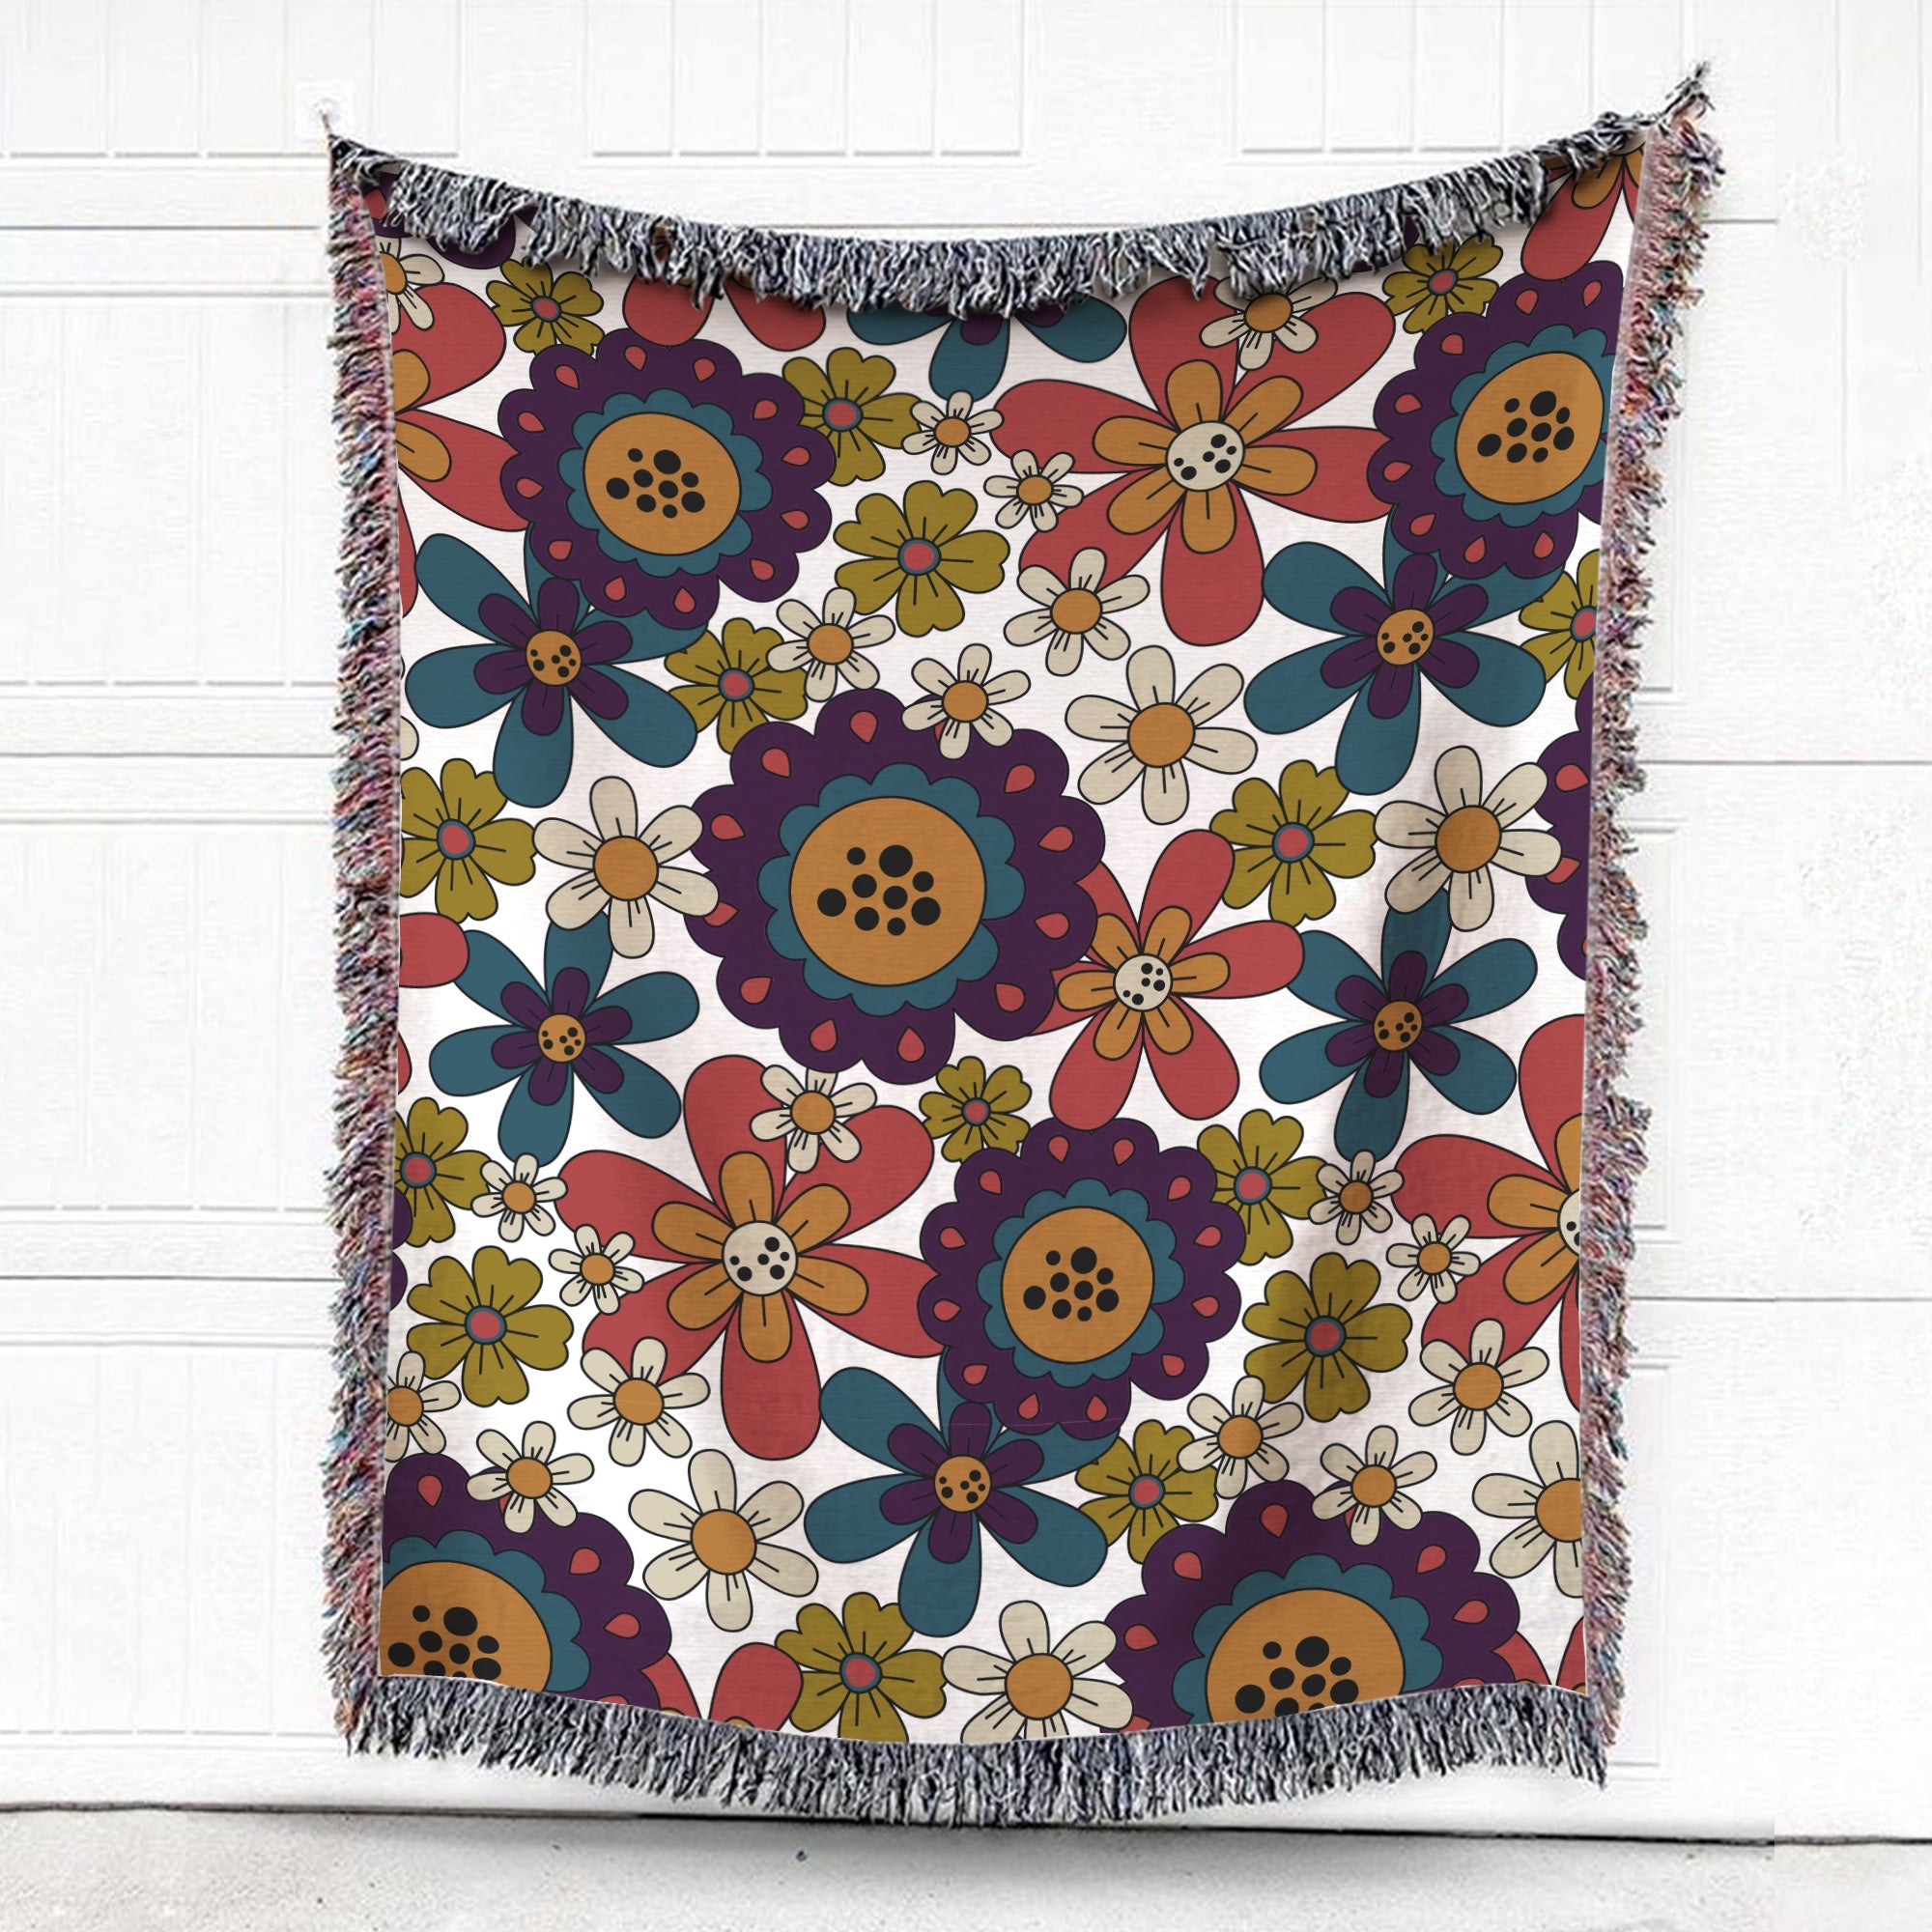 Colorful Groovy Flowers Woven Blanket